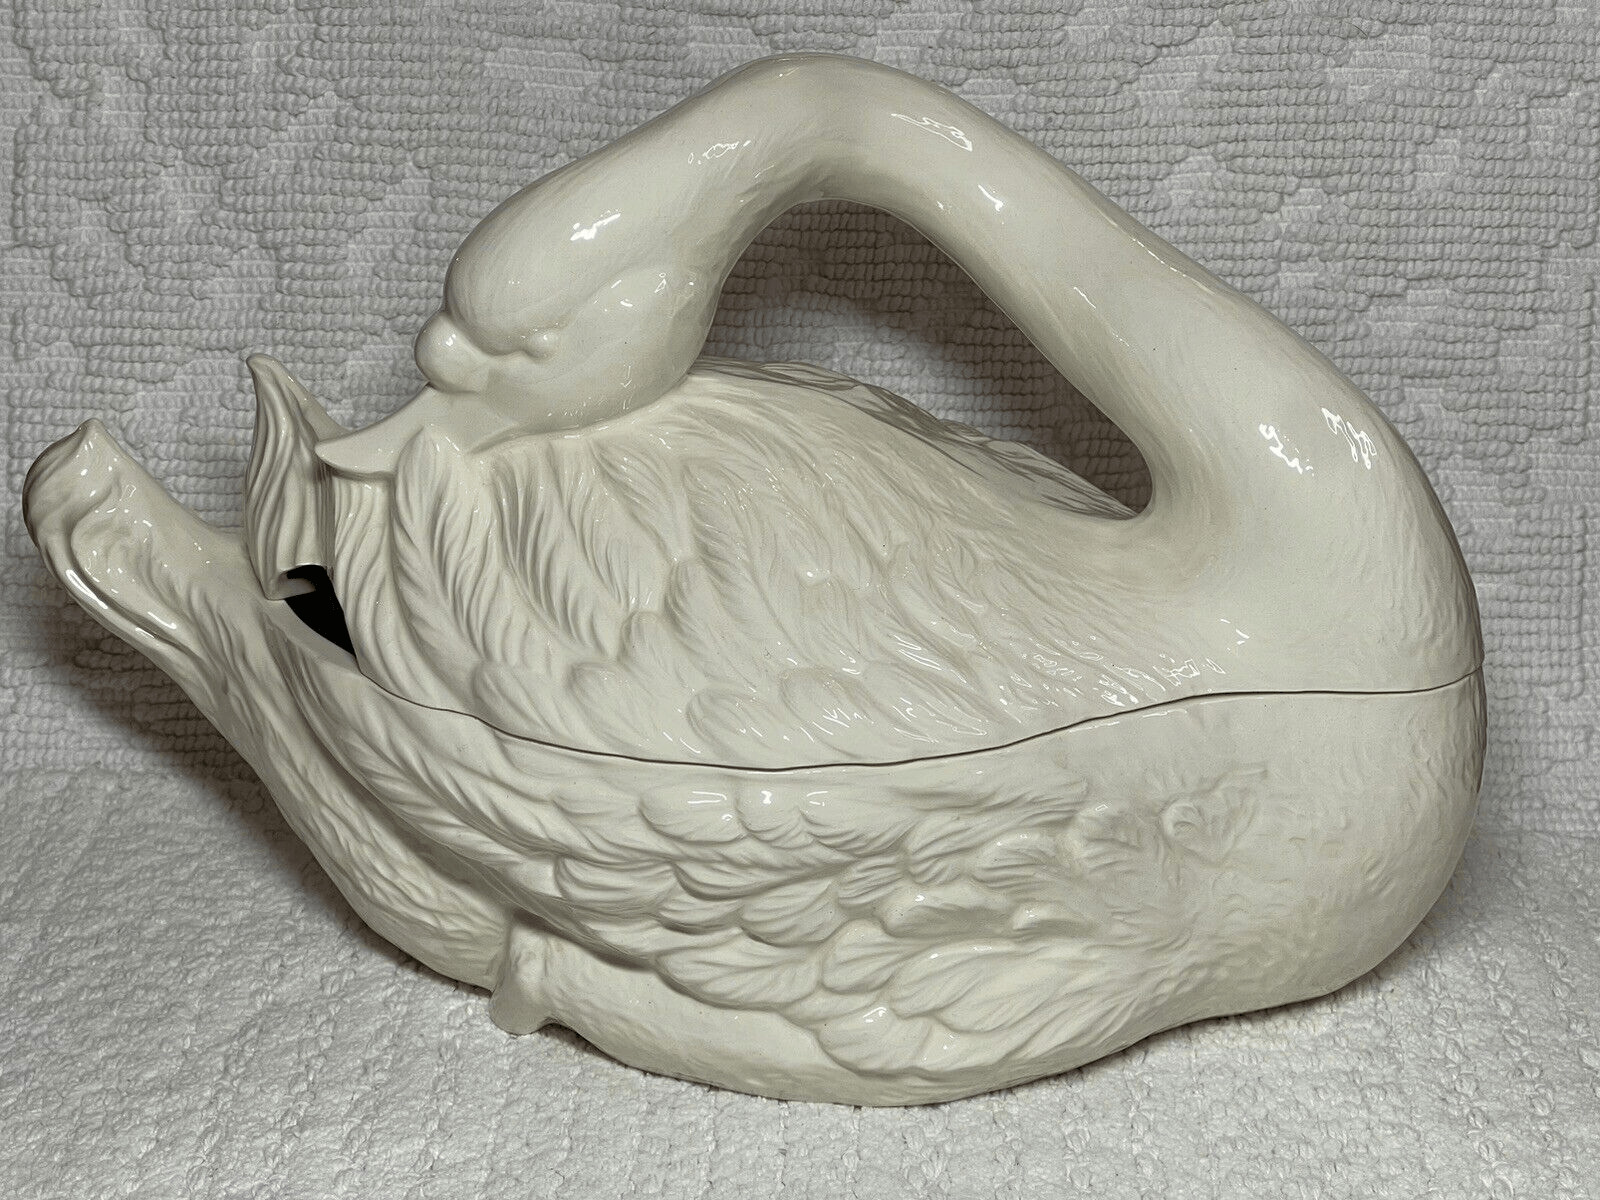 Vintage Glazed Ceramic Swan Goose Soup Tureen All White Excellent Condition 1986